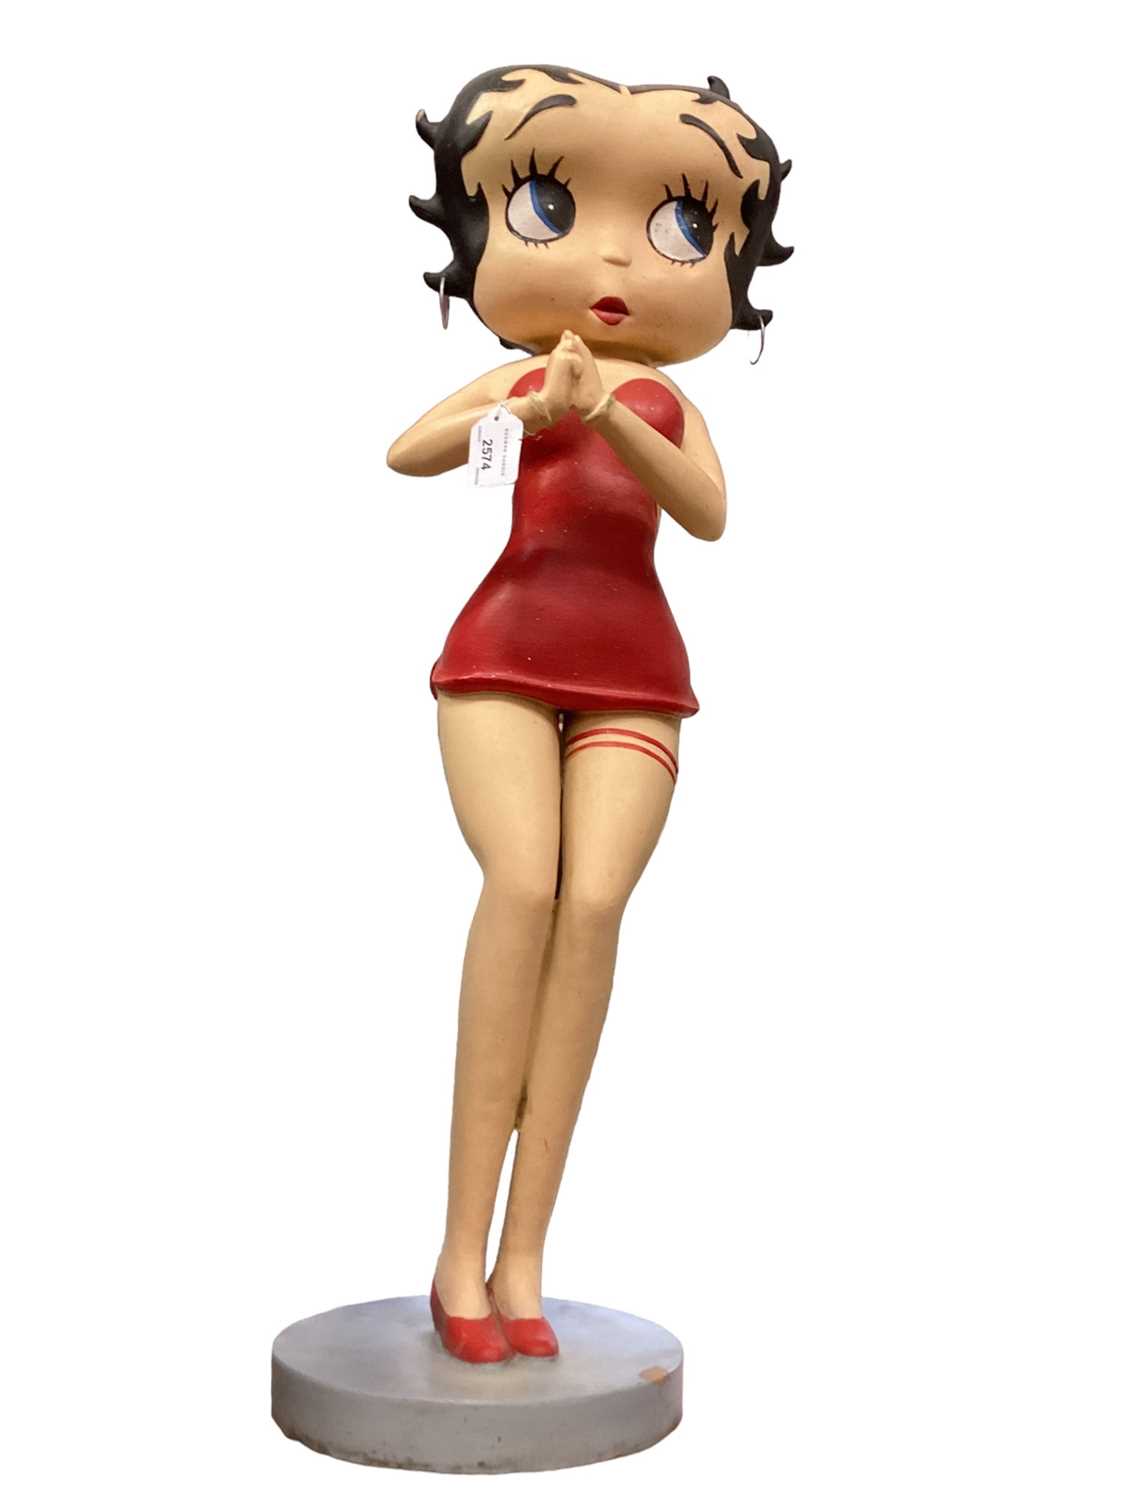 Lot 2574 - Free standing Betty Boop figure, approximately 88cm in height.